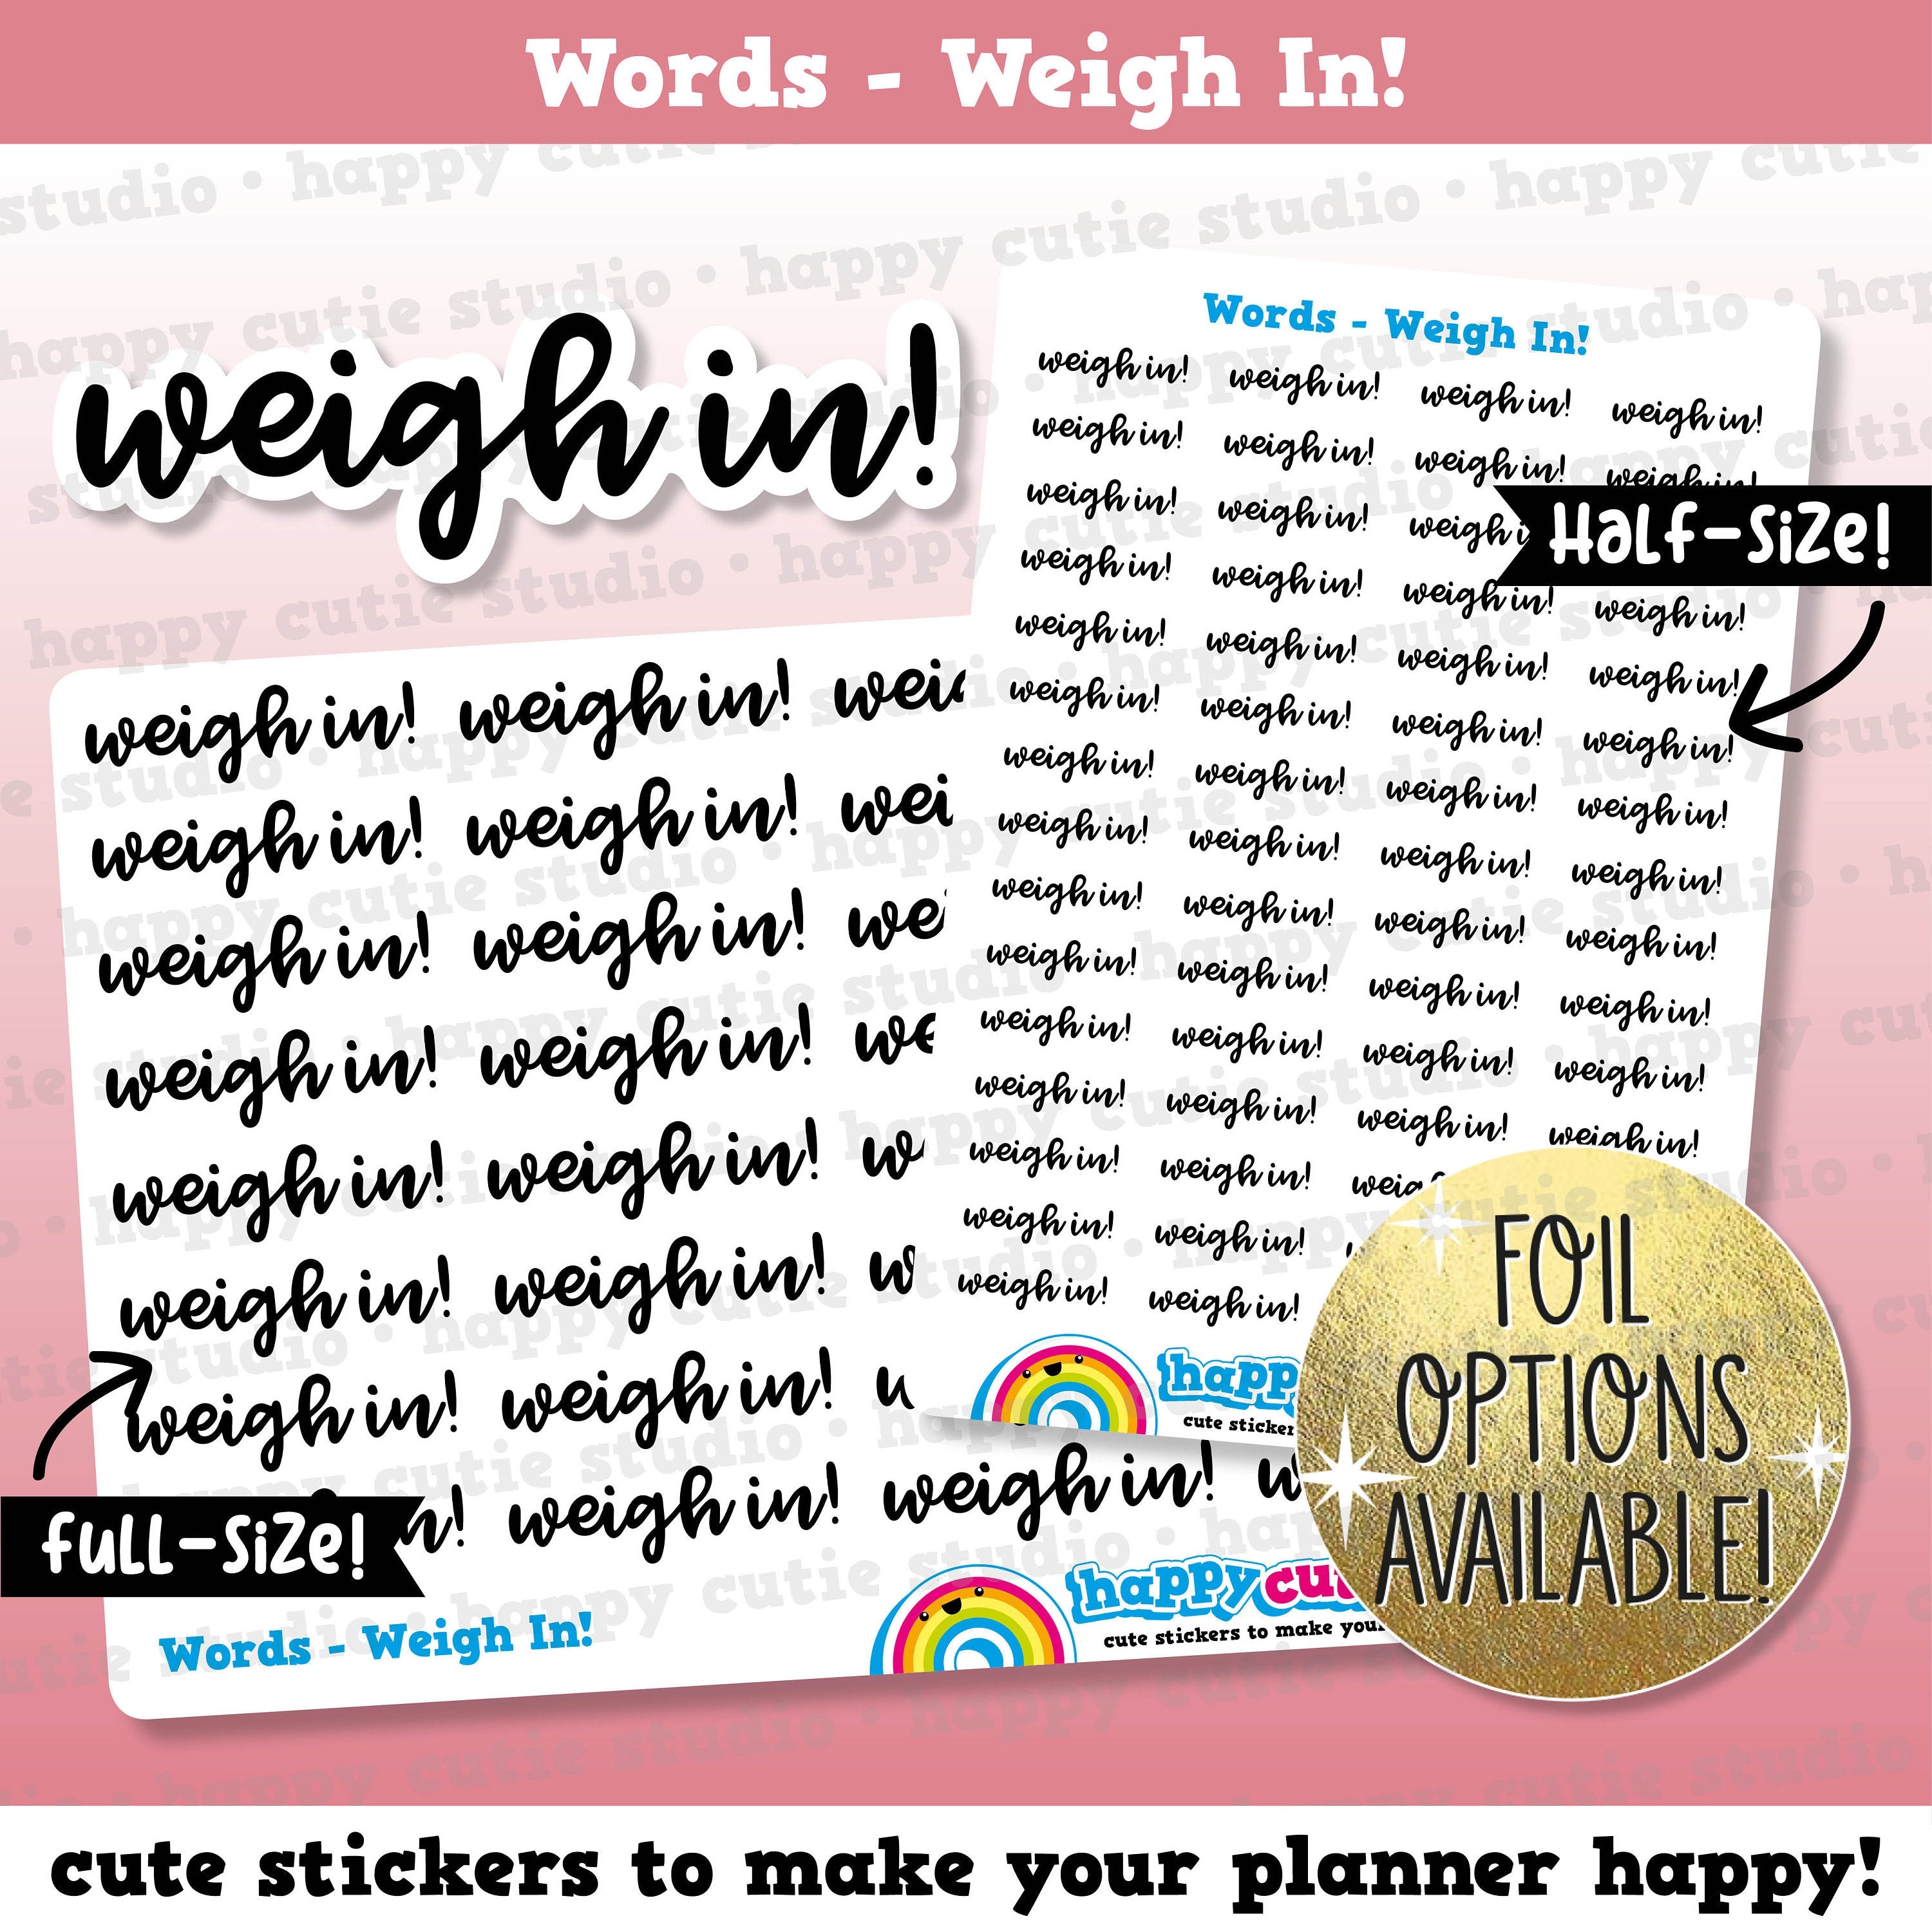 Weigh In Words/Functional/Foil Planner Stickers